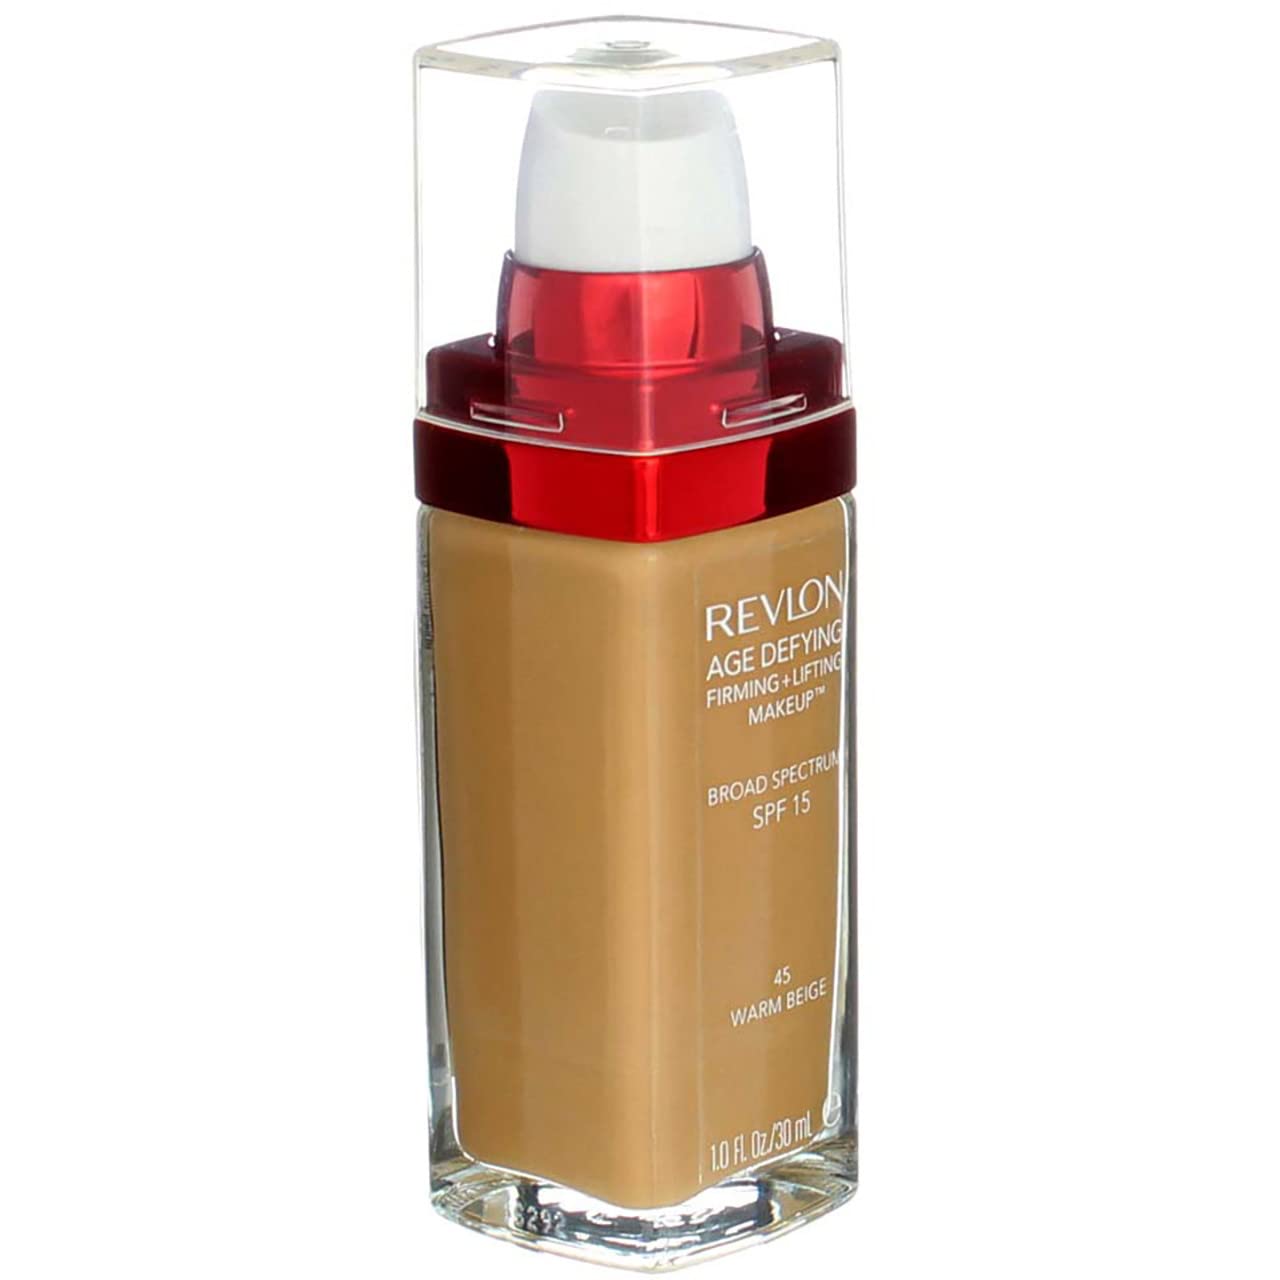 Revlon Age Defying Firming + Lifting Makeup, 45 Warm Beige,( Pack of 4)